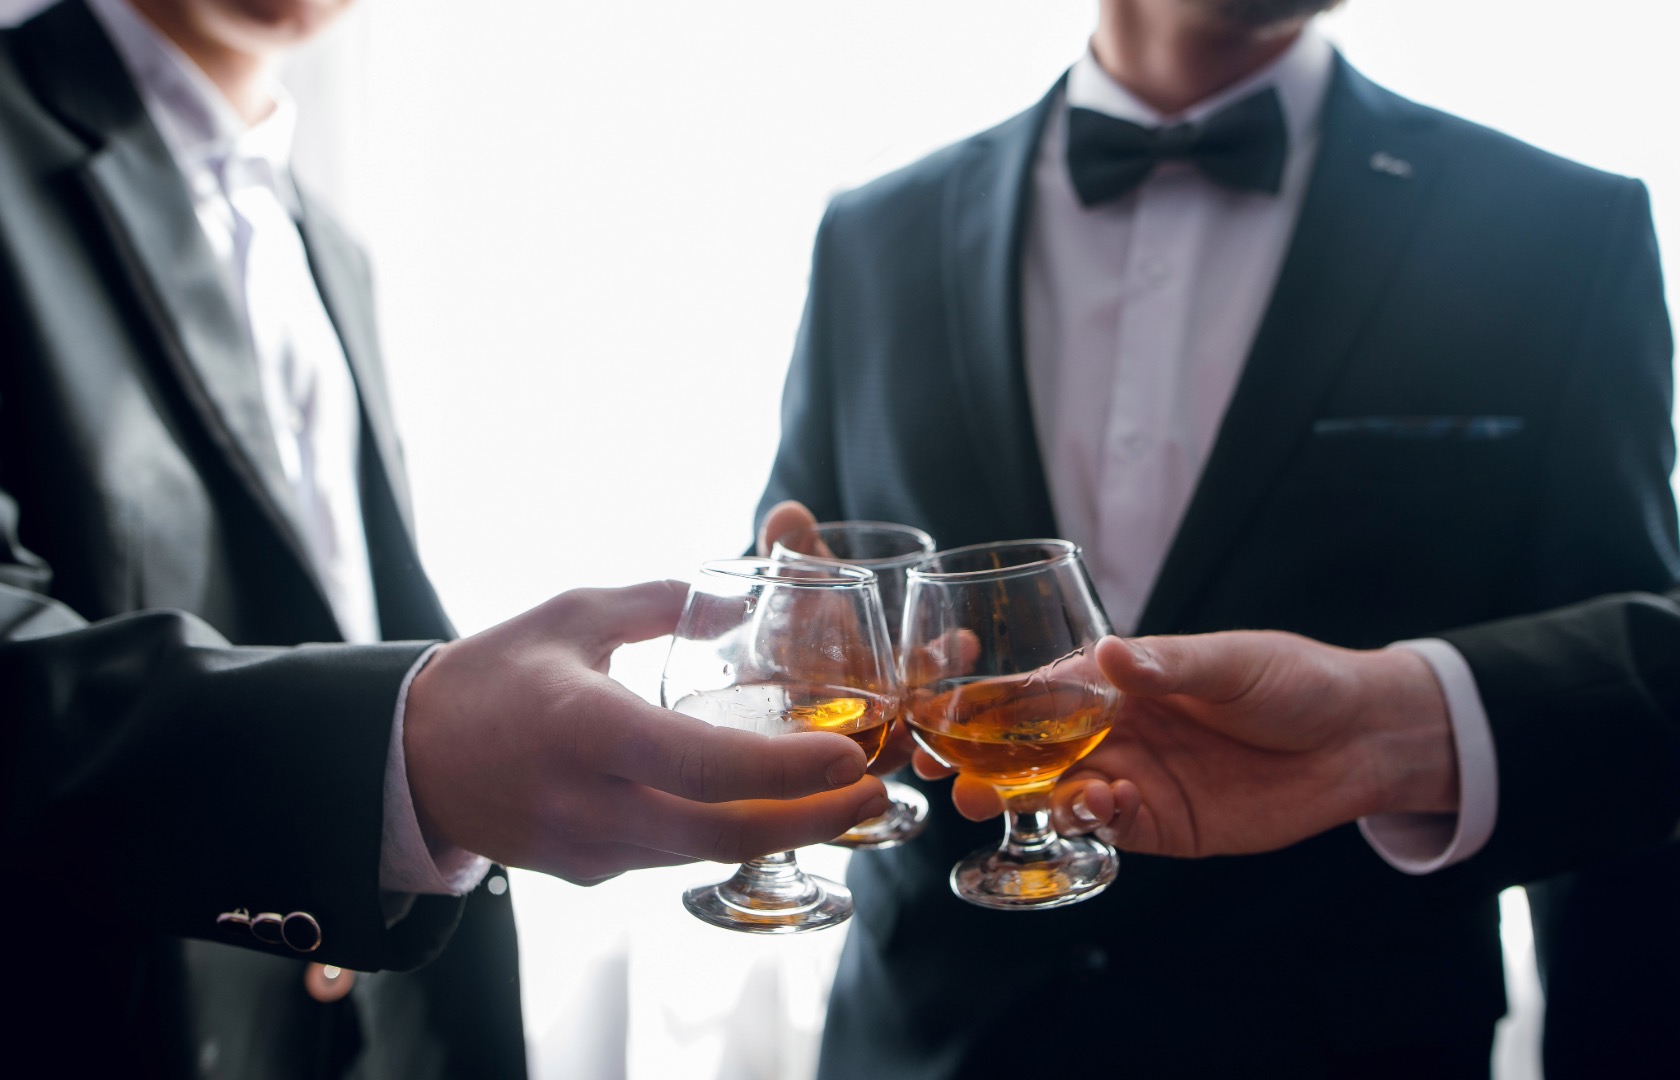 Best Man Duties: Don't Steal Bride! Do These Things Instead 111